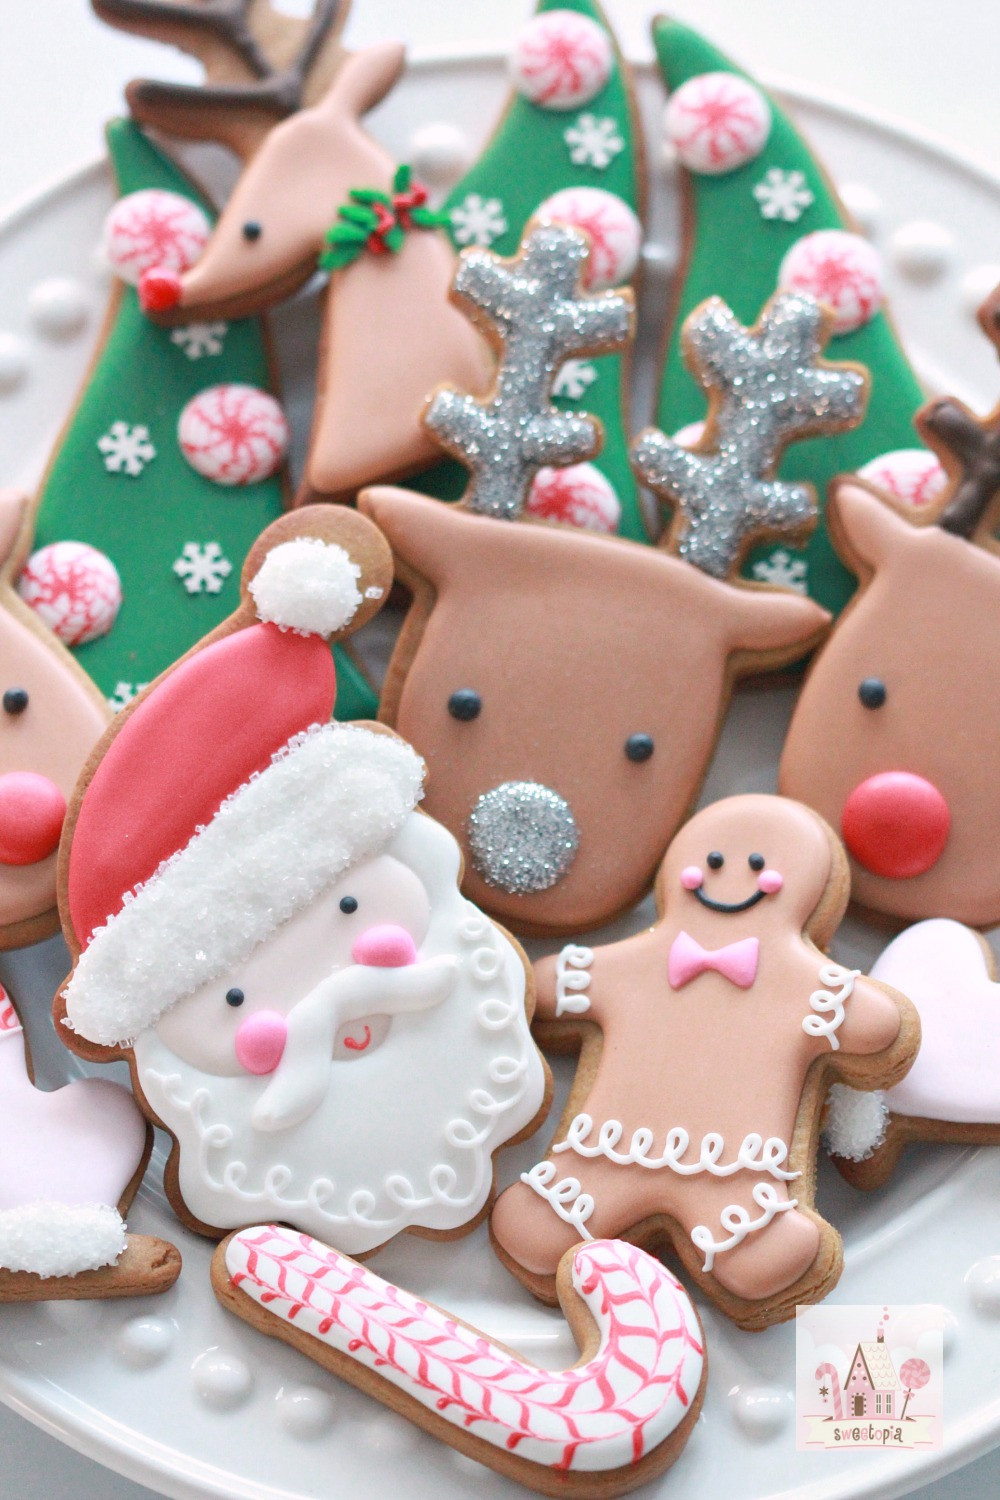 Icing For Christmas Cookies
 Video How to Decorate Christmas Cookies Simple Designs